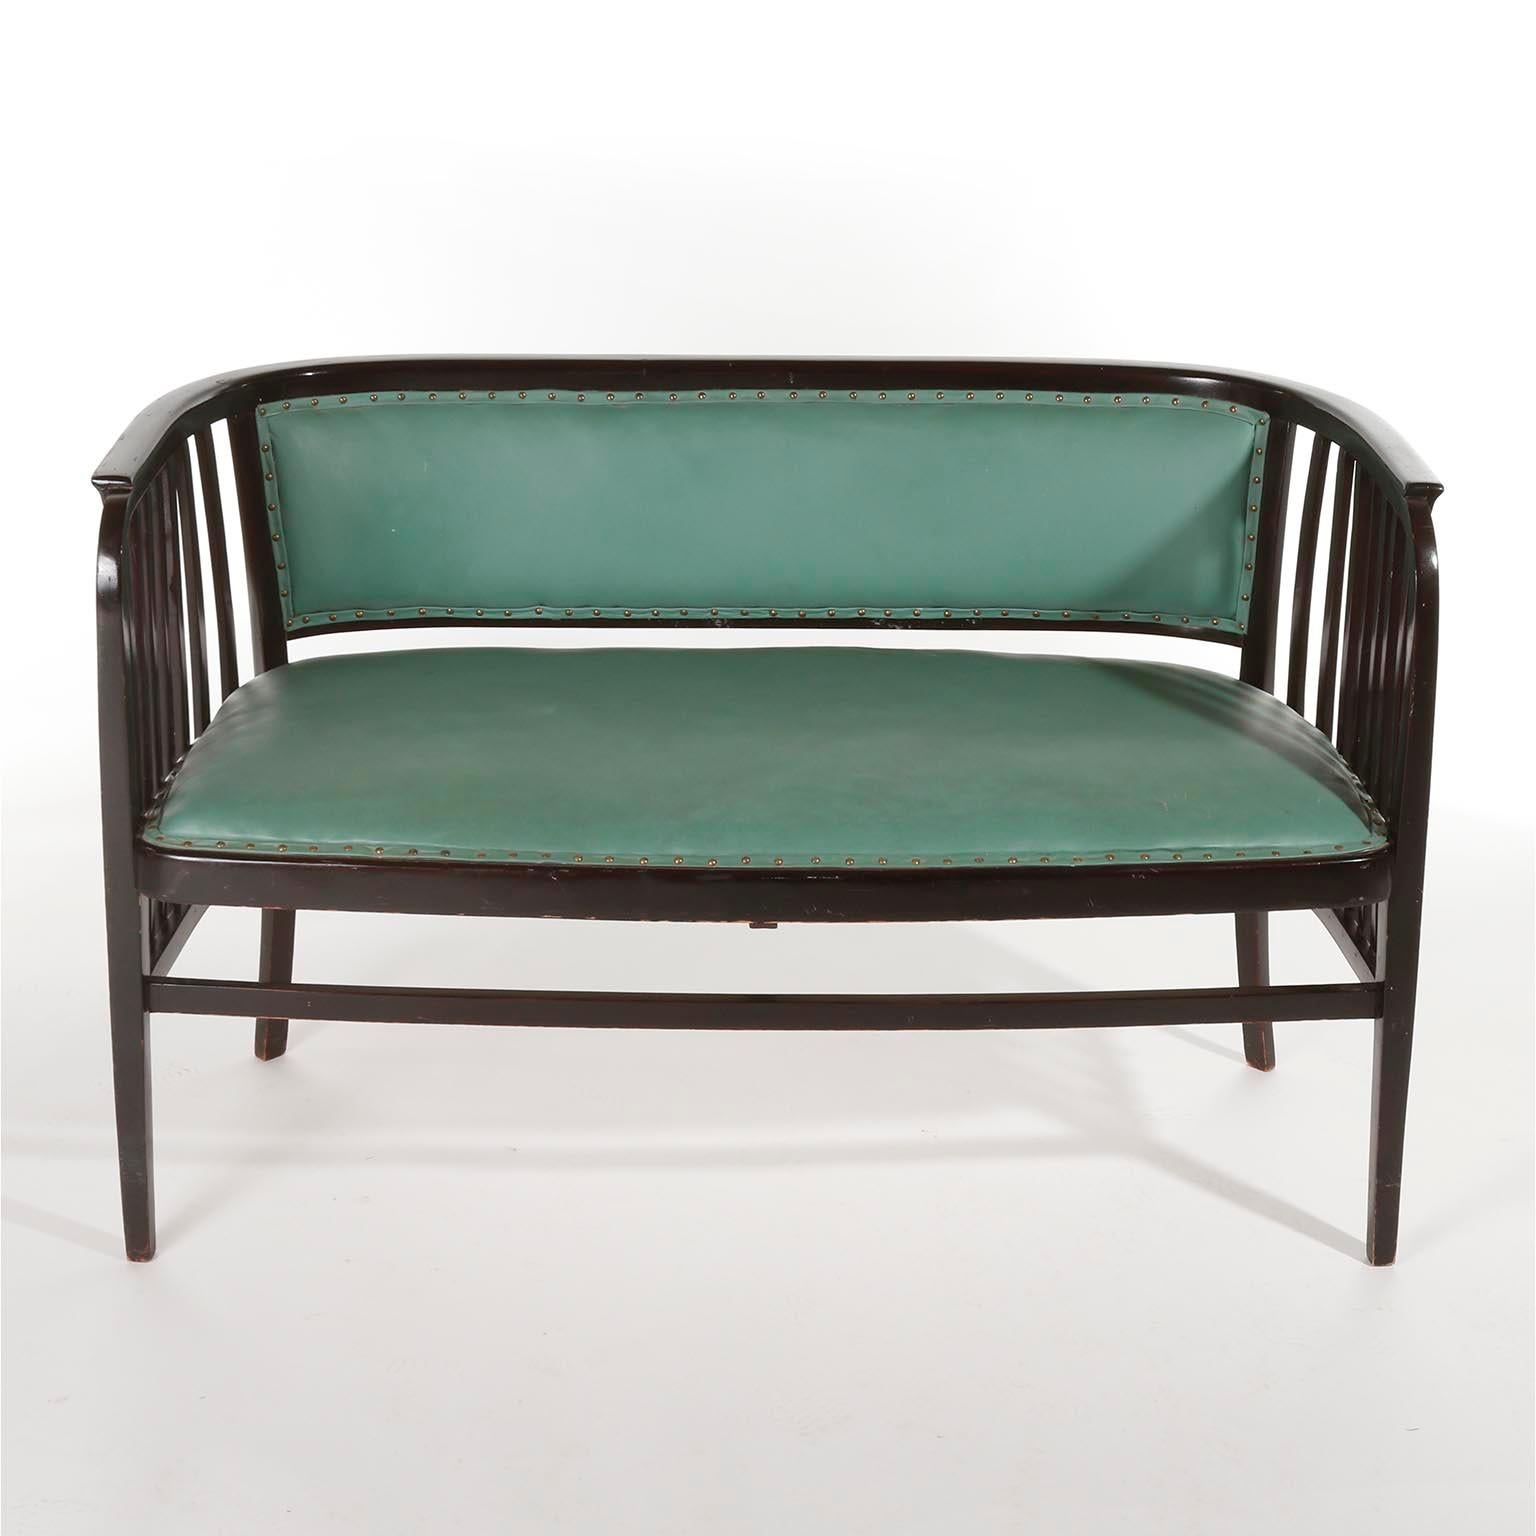 green leather bench seat